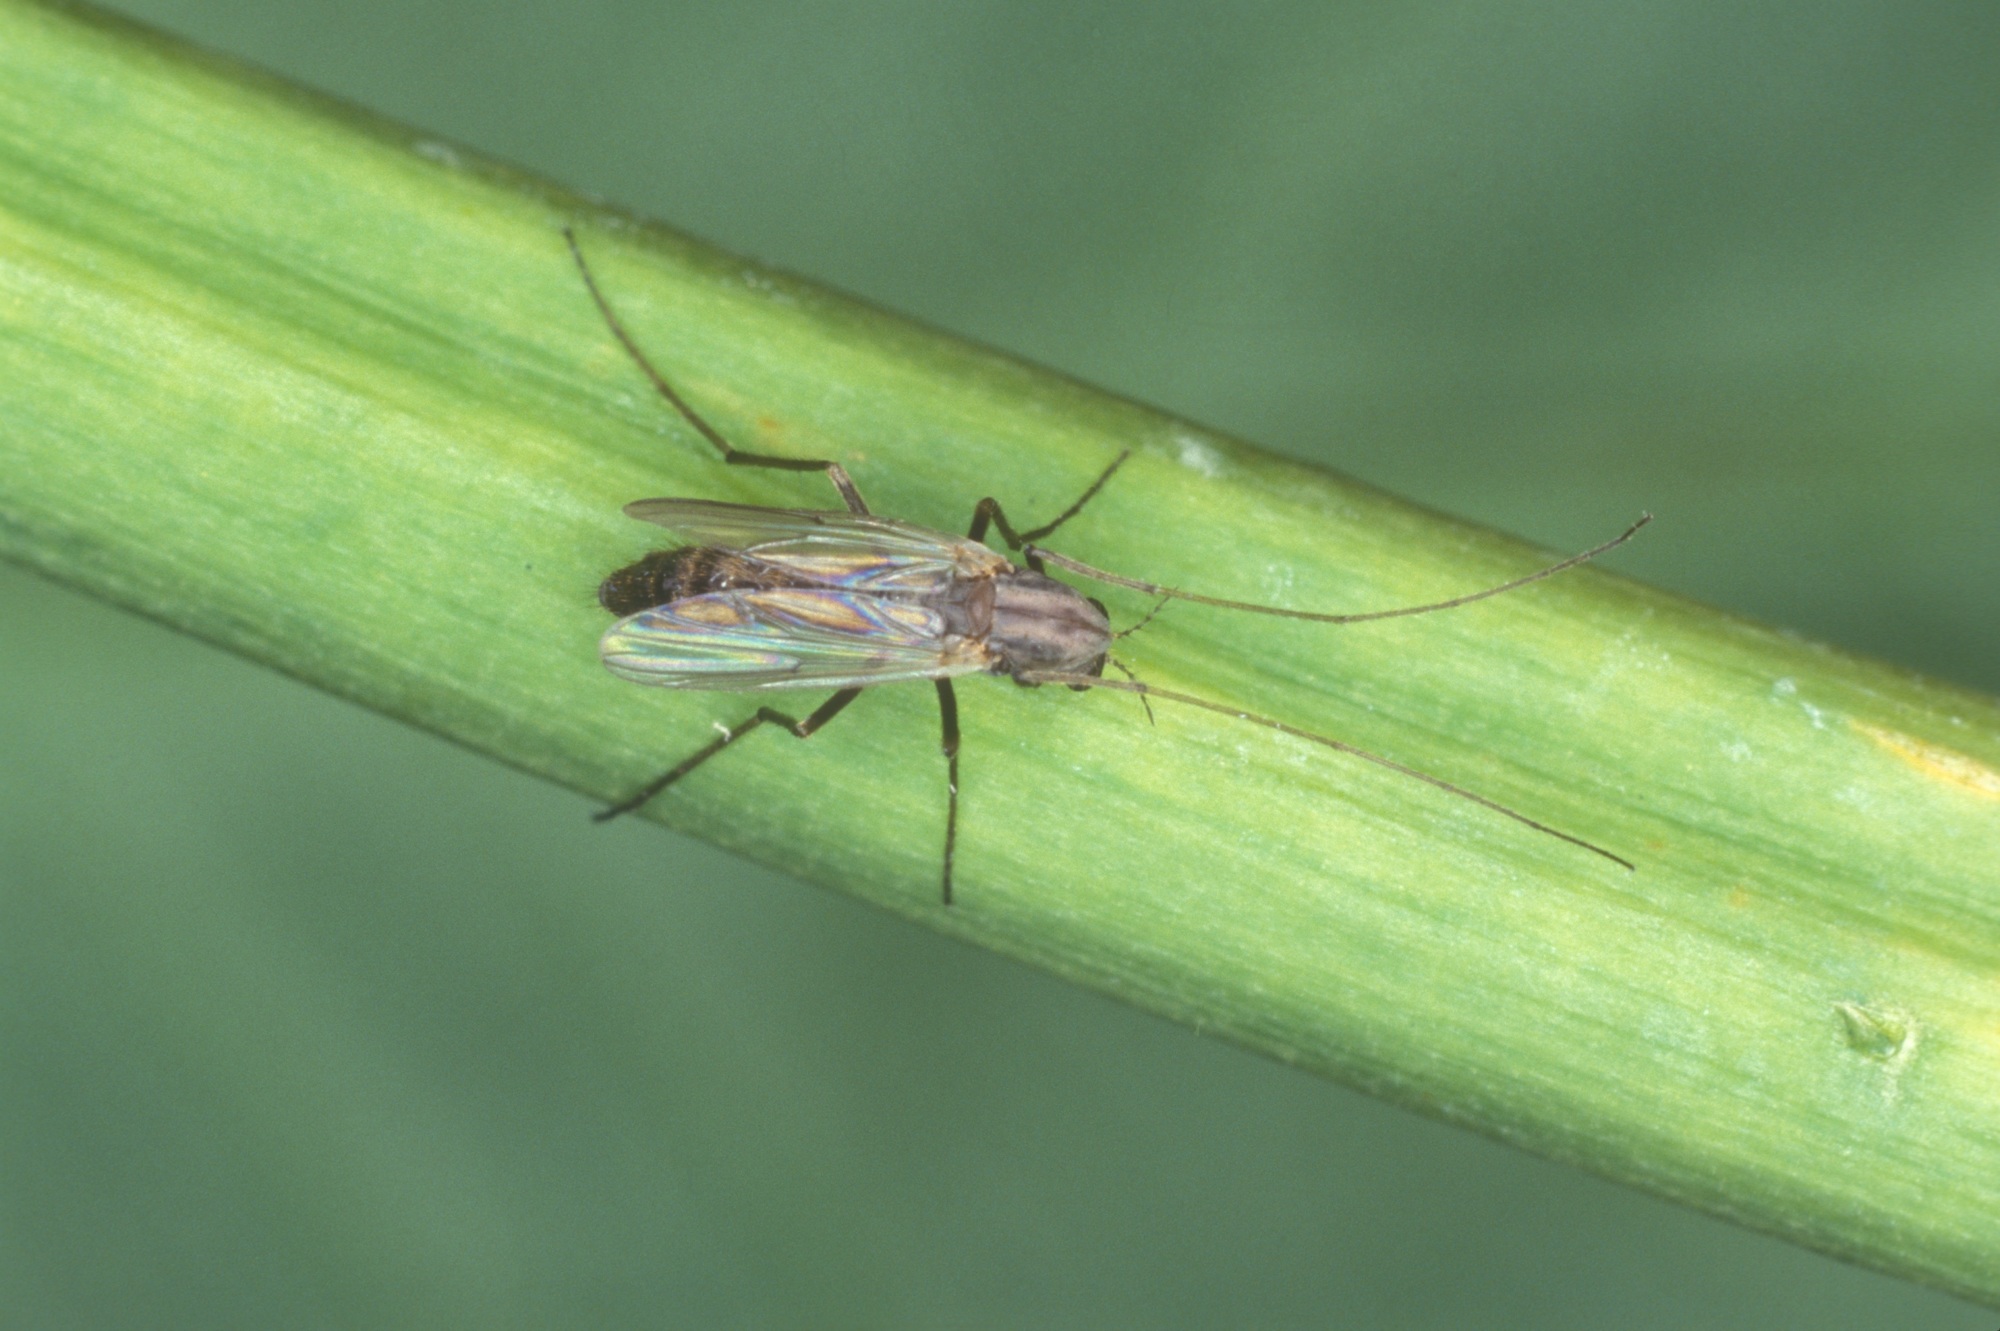 Aquatic midges are called blind mosquitoes. Although they do not bite, they swarm and can damage property. Photo courtesy of Lyle Buss of UF/IFAS.